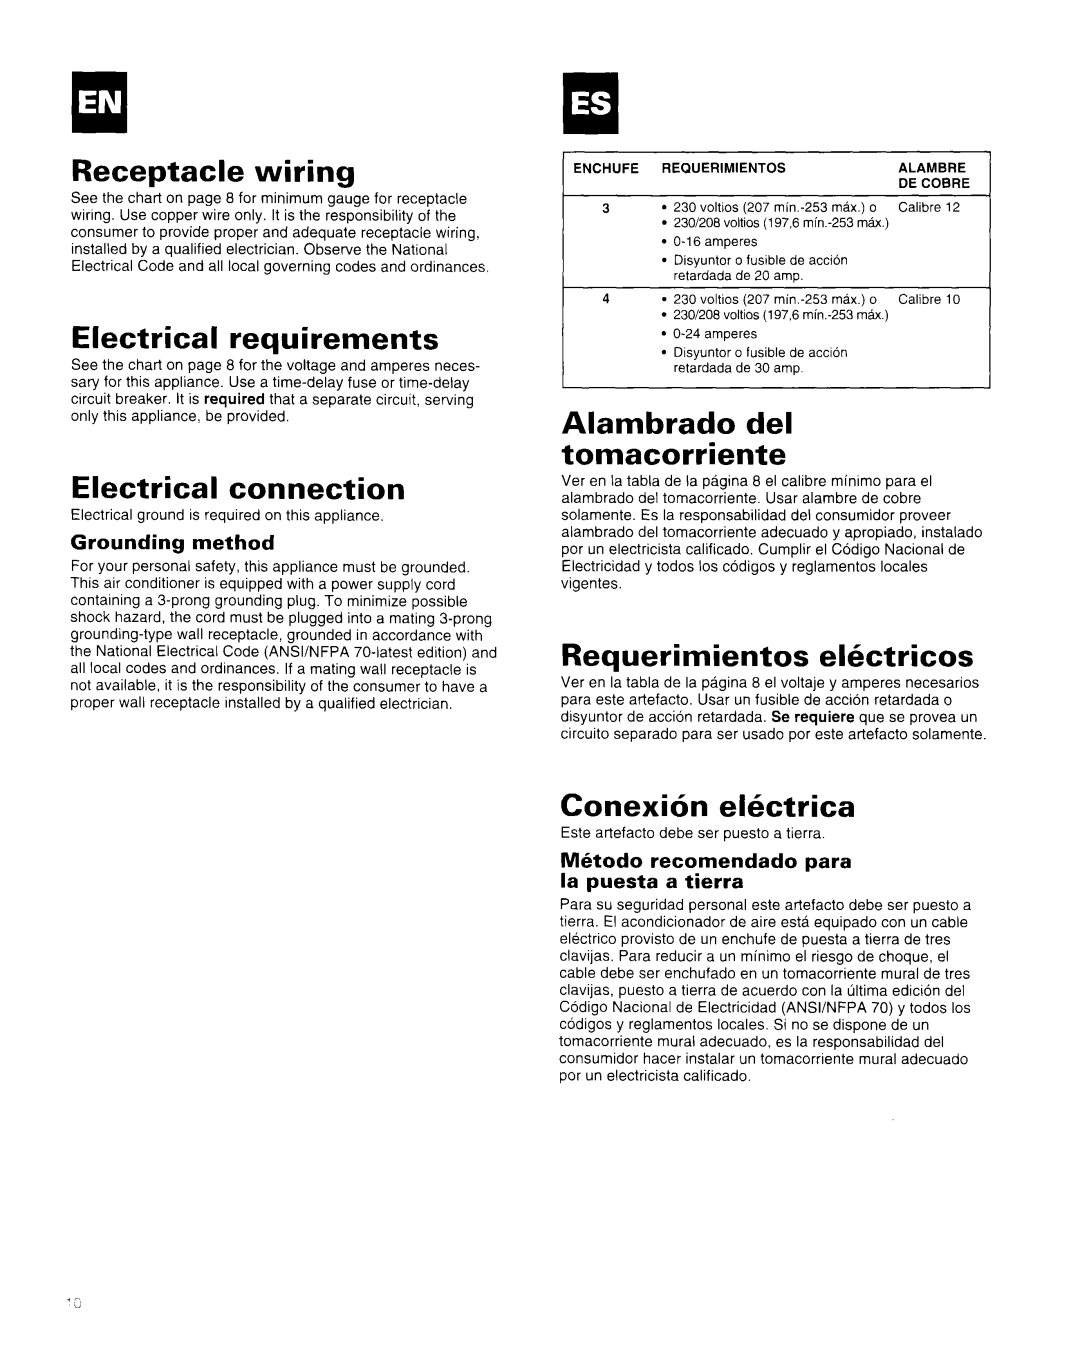 Whirlpool AR1800XA0 manual Receptacle wiring, Electrical requirements, Electrical connection, Alambrado del tomacorriente 